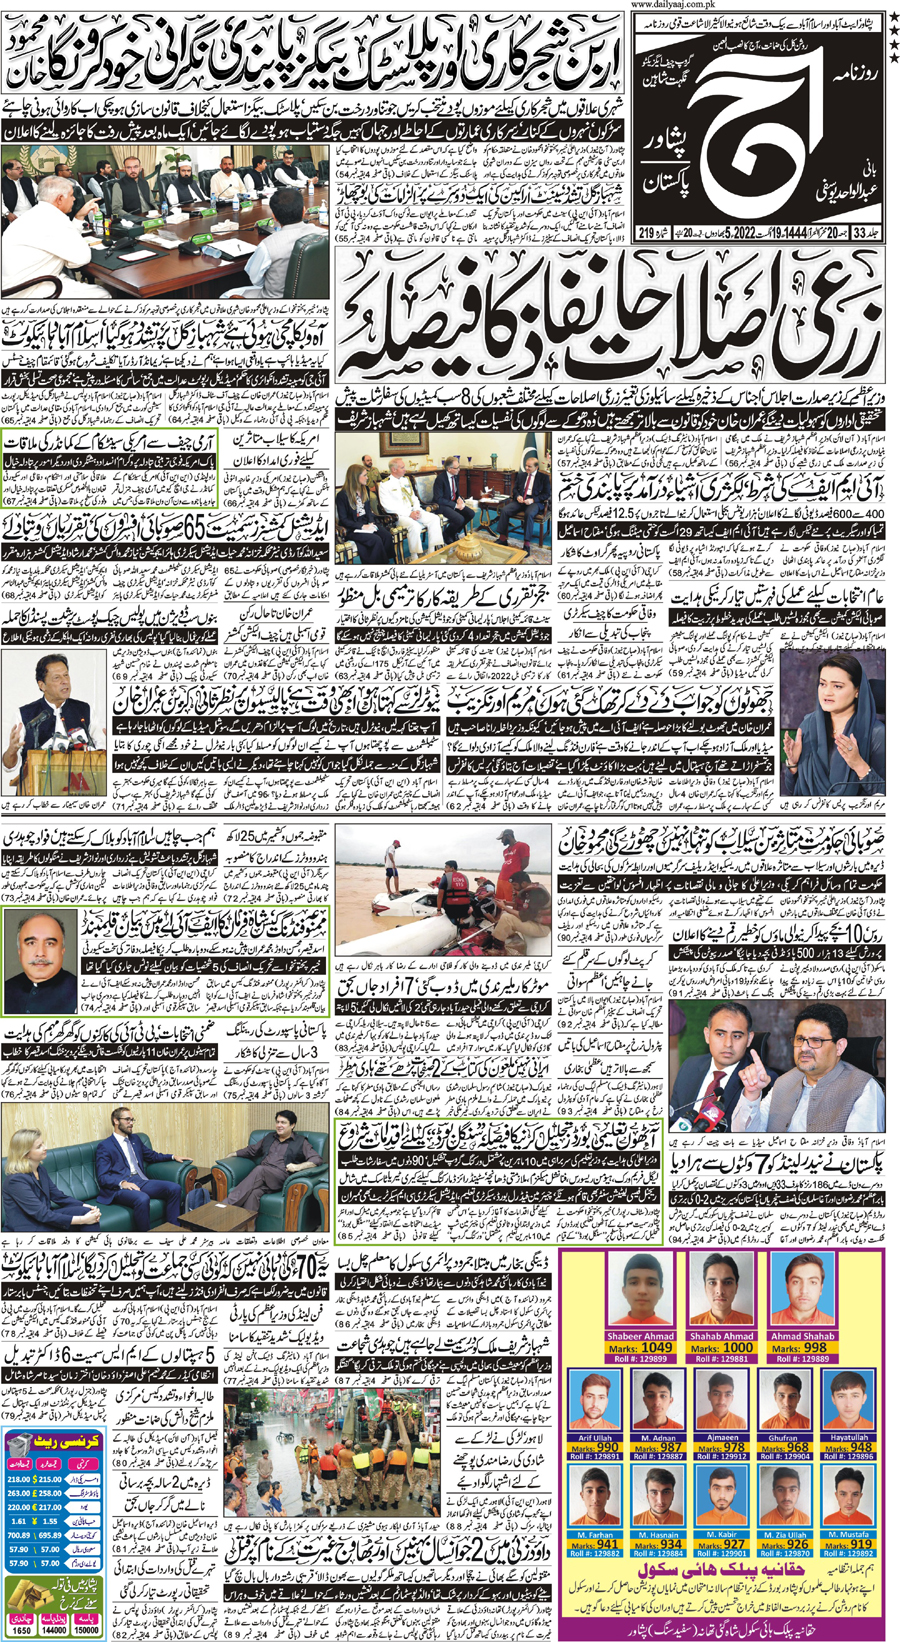 Epaper | 19 August, 2022 | Peshawar | Front Page | Daily Aaj